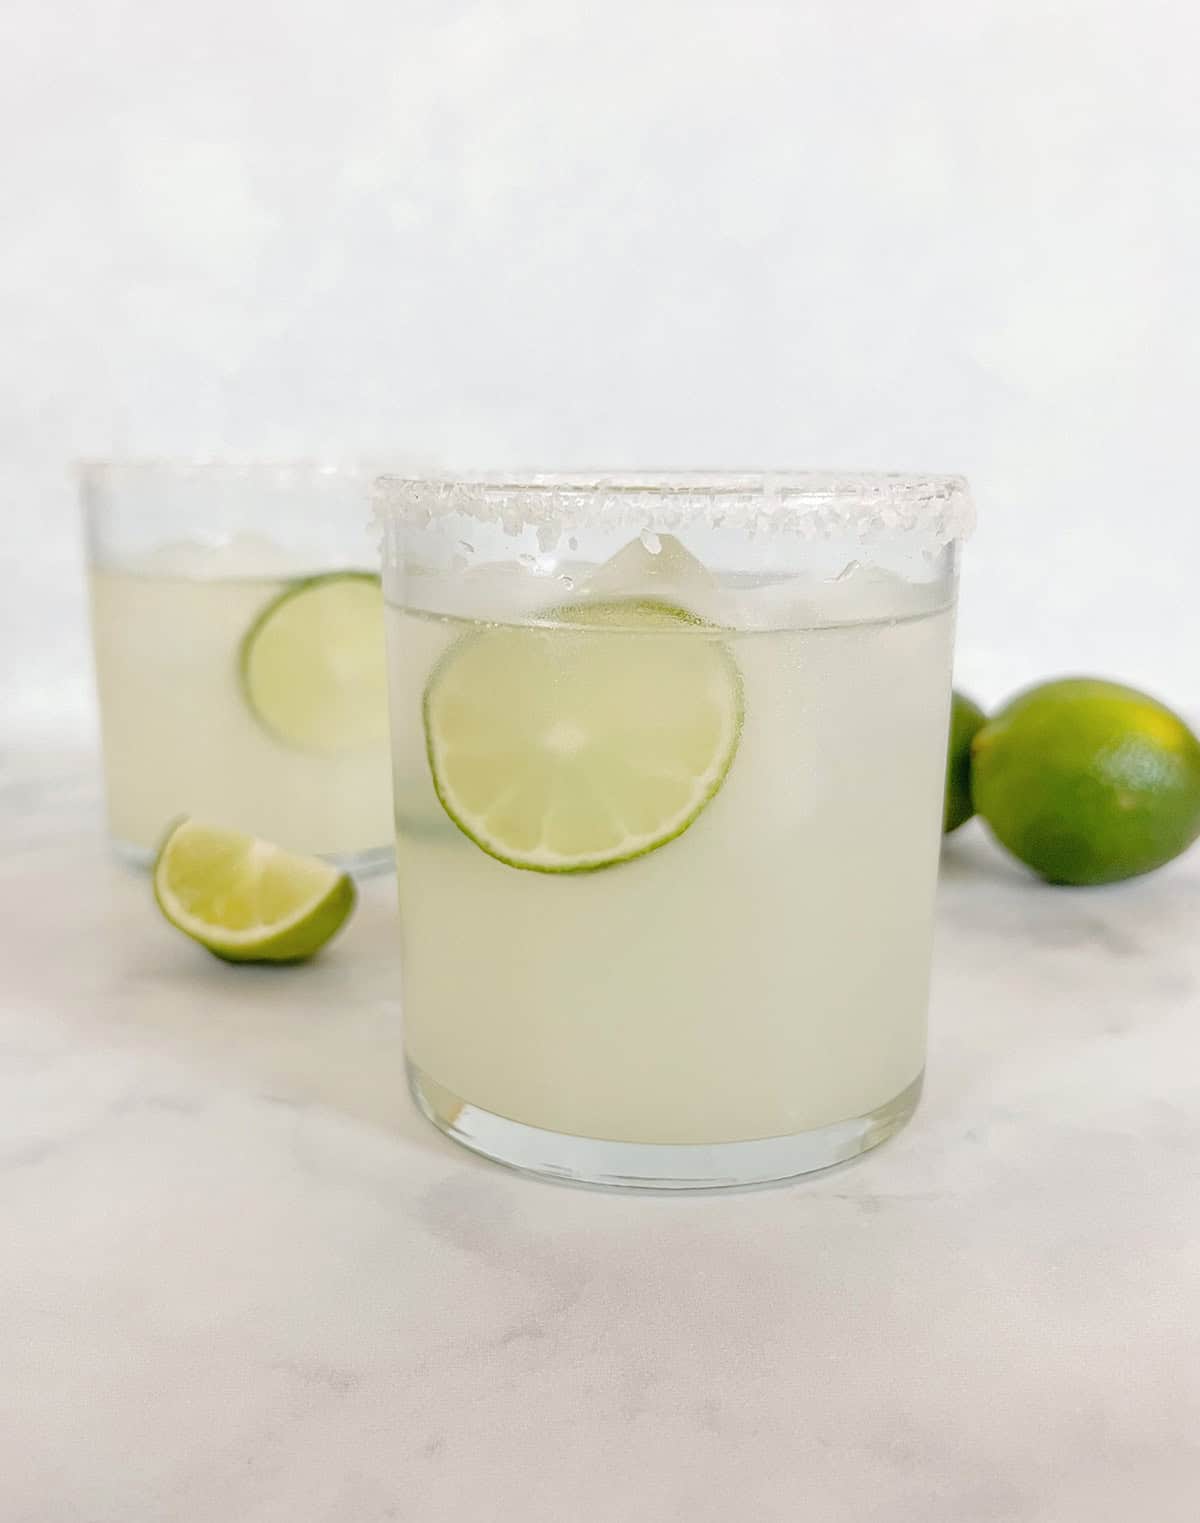 limemade margaritas in clear glasses garnished with fresh lime slices.